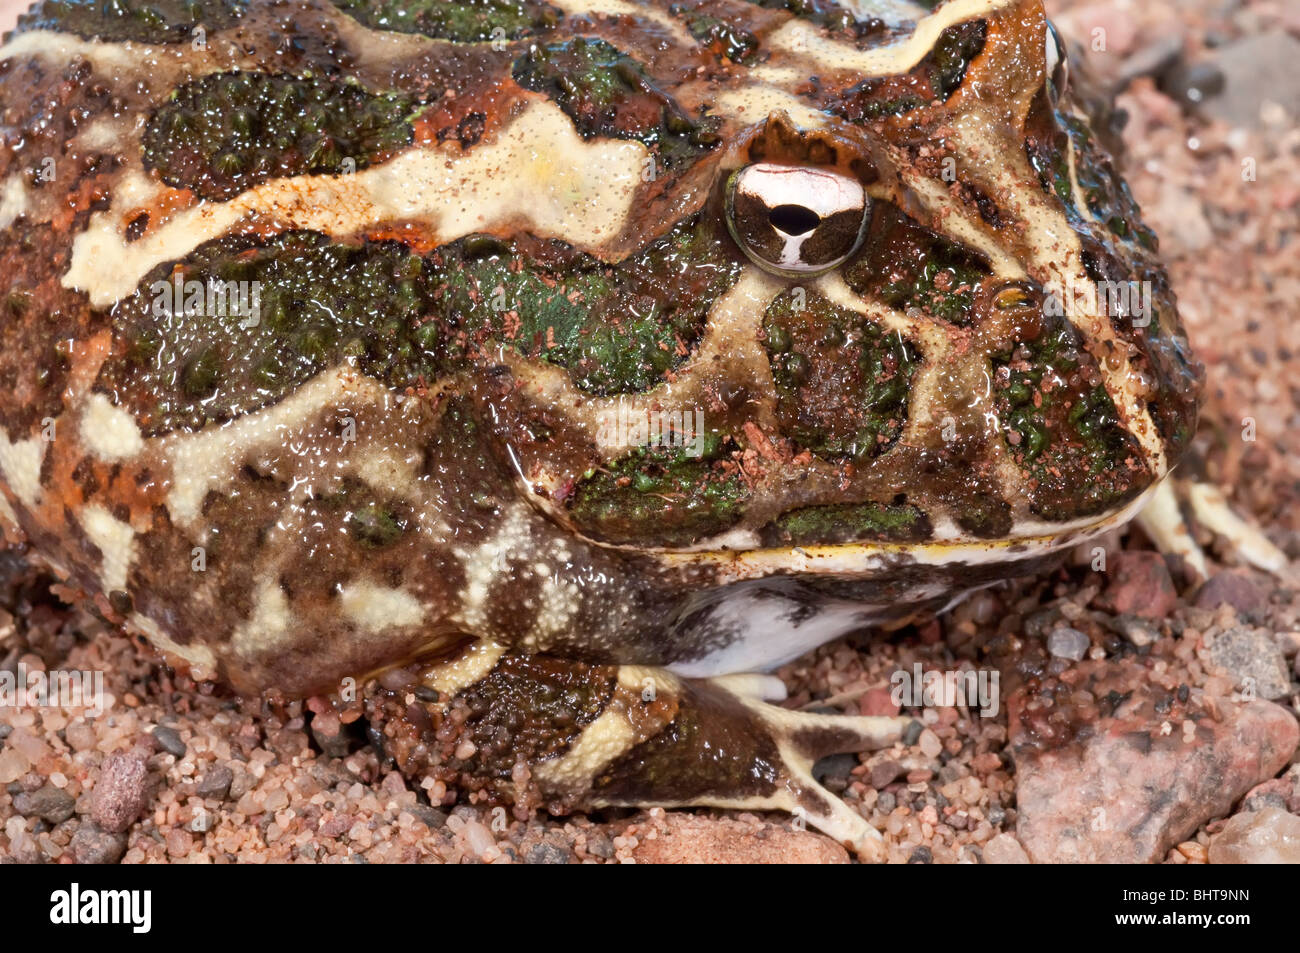 Page 3 - Ceratophrys High Resolution Stock Photography and Images - Alamy